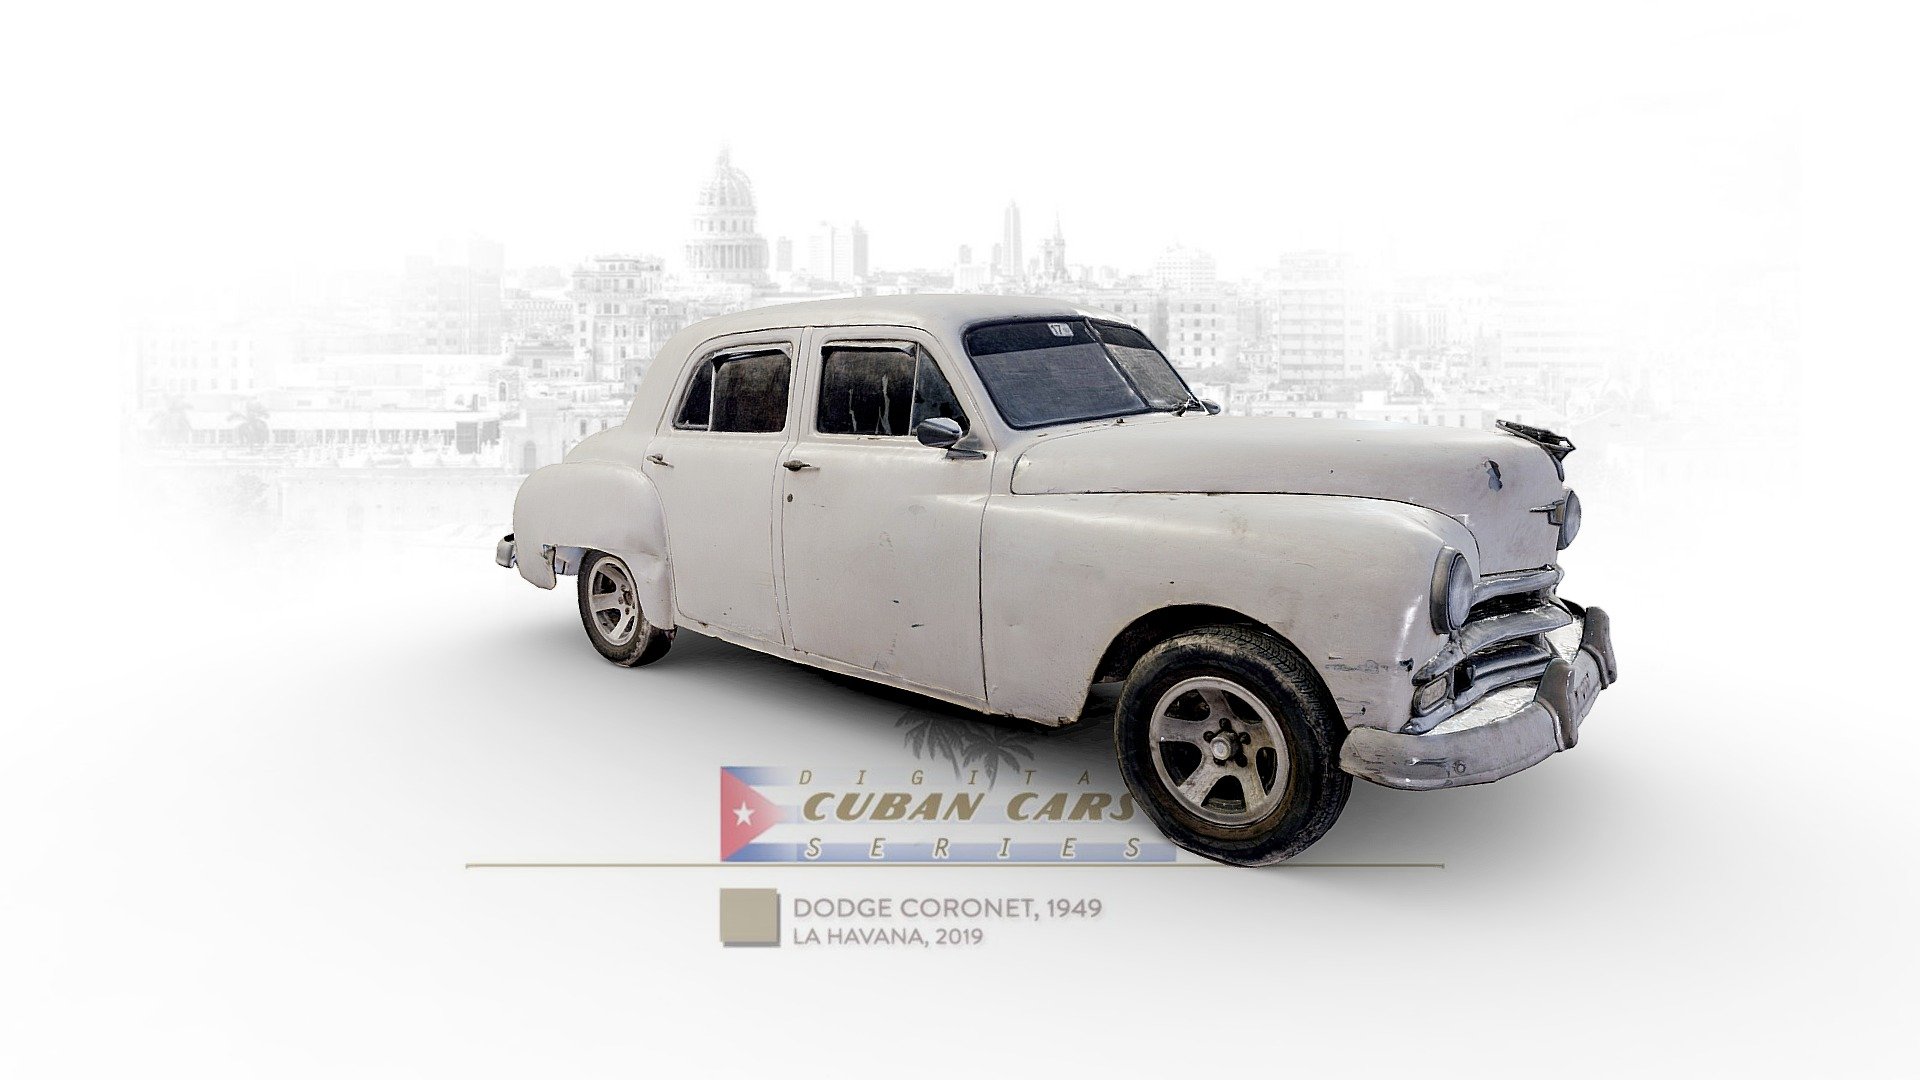 This is the first of &ldquo;Digital Cuban Cars